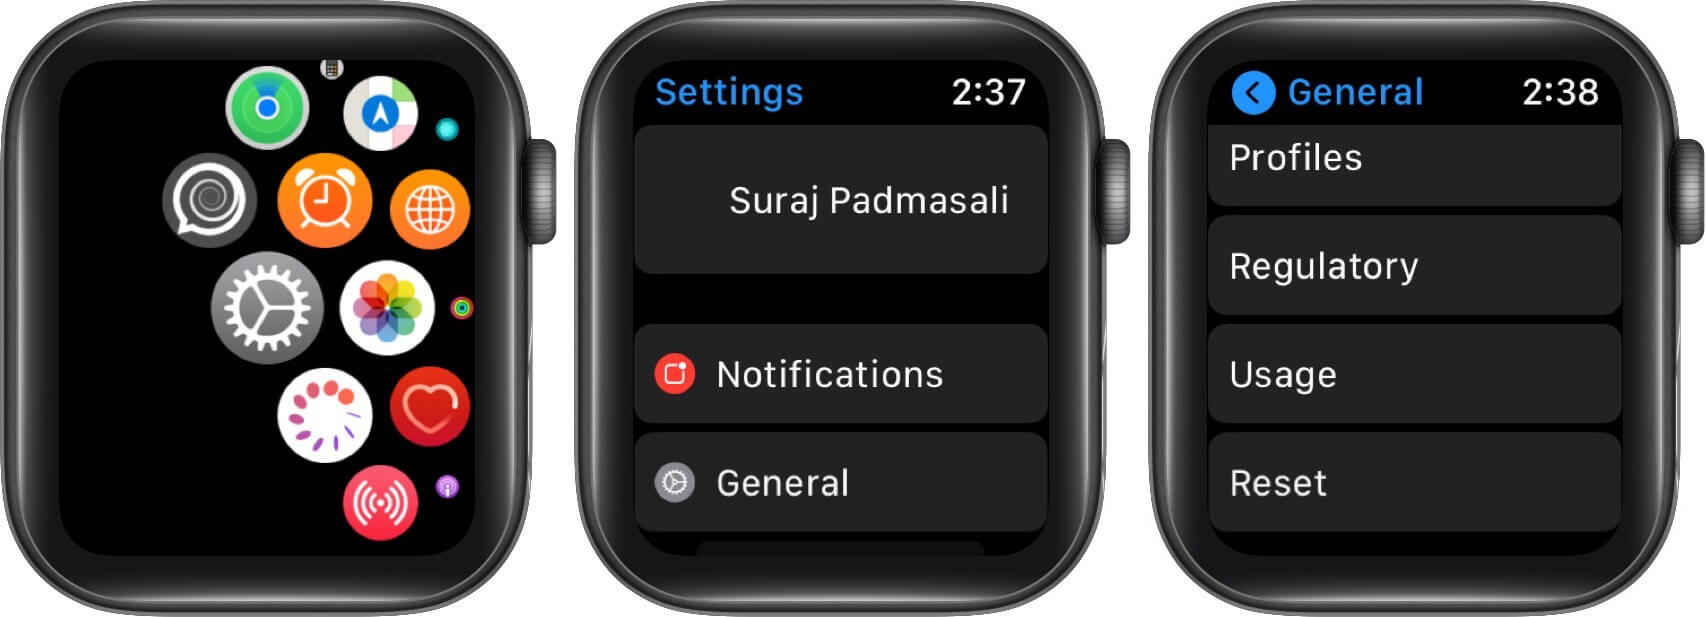 open settings tap on general then tap on reset on apple watch